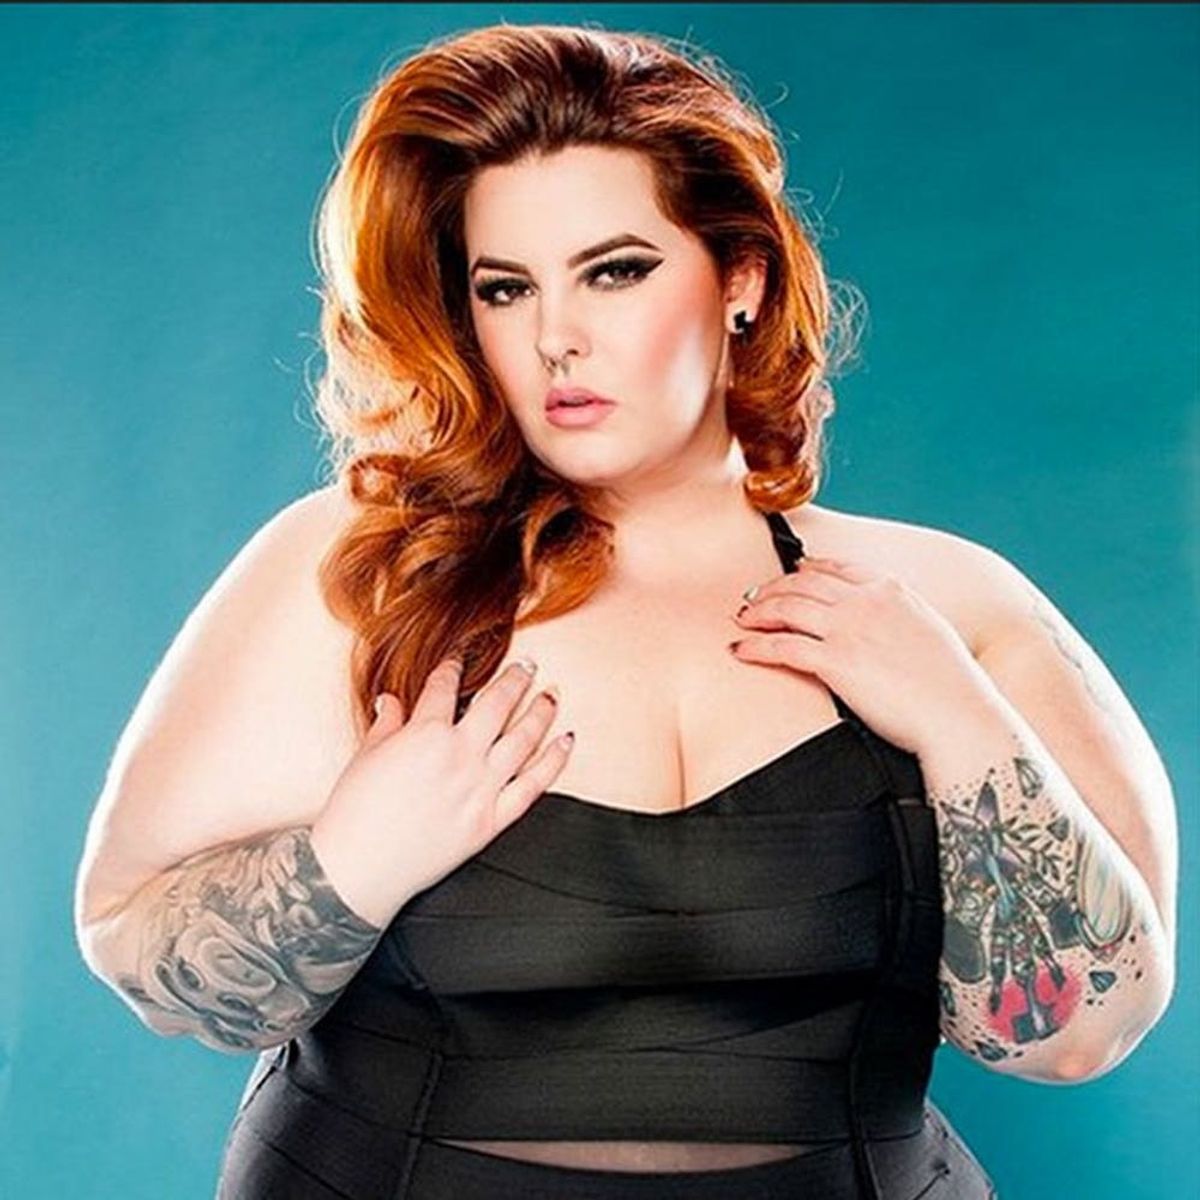 Meet the First (WHAT?!) Plus Size Model With a Major Contract